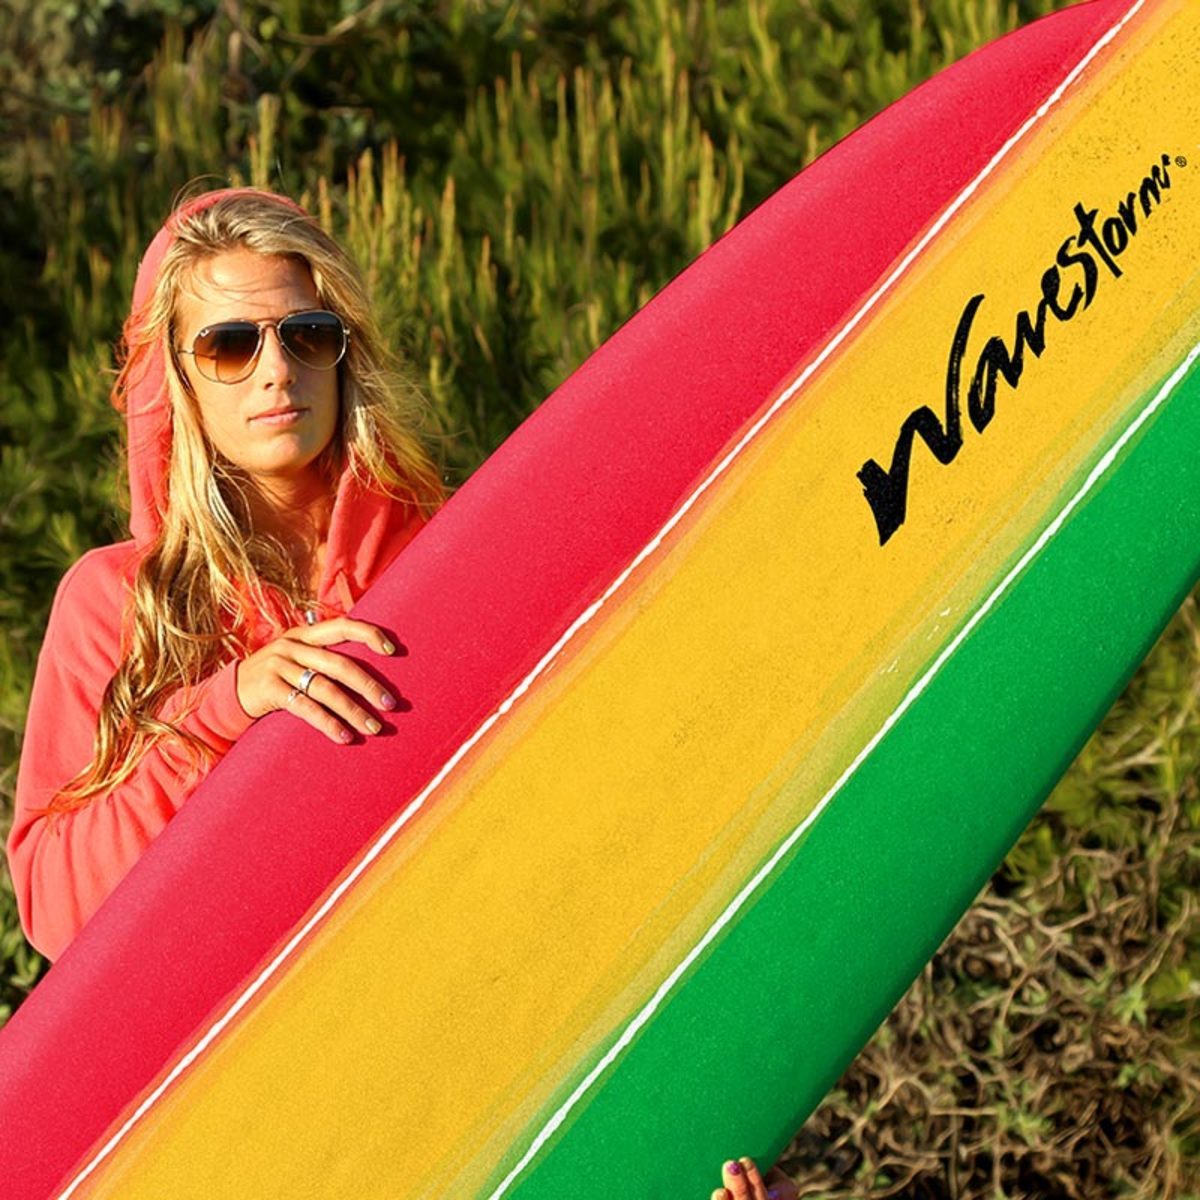 Wavestorm 8ft Classic Surfboard in Yellow, Red and Green Stripe